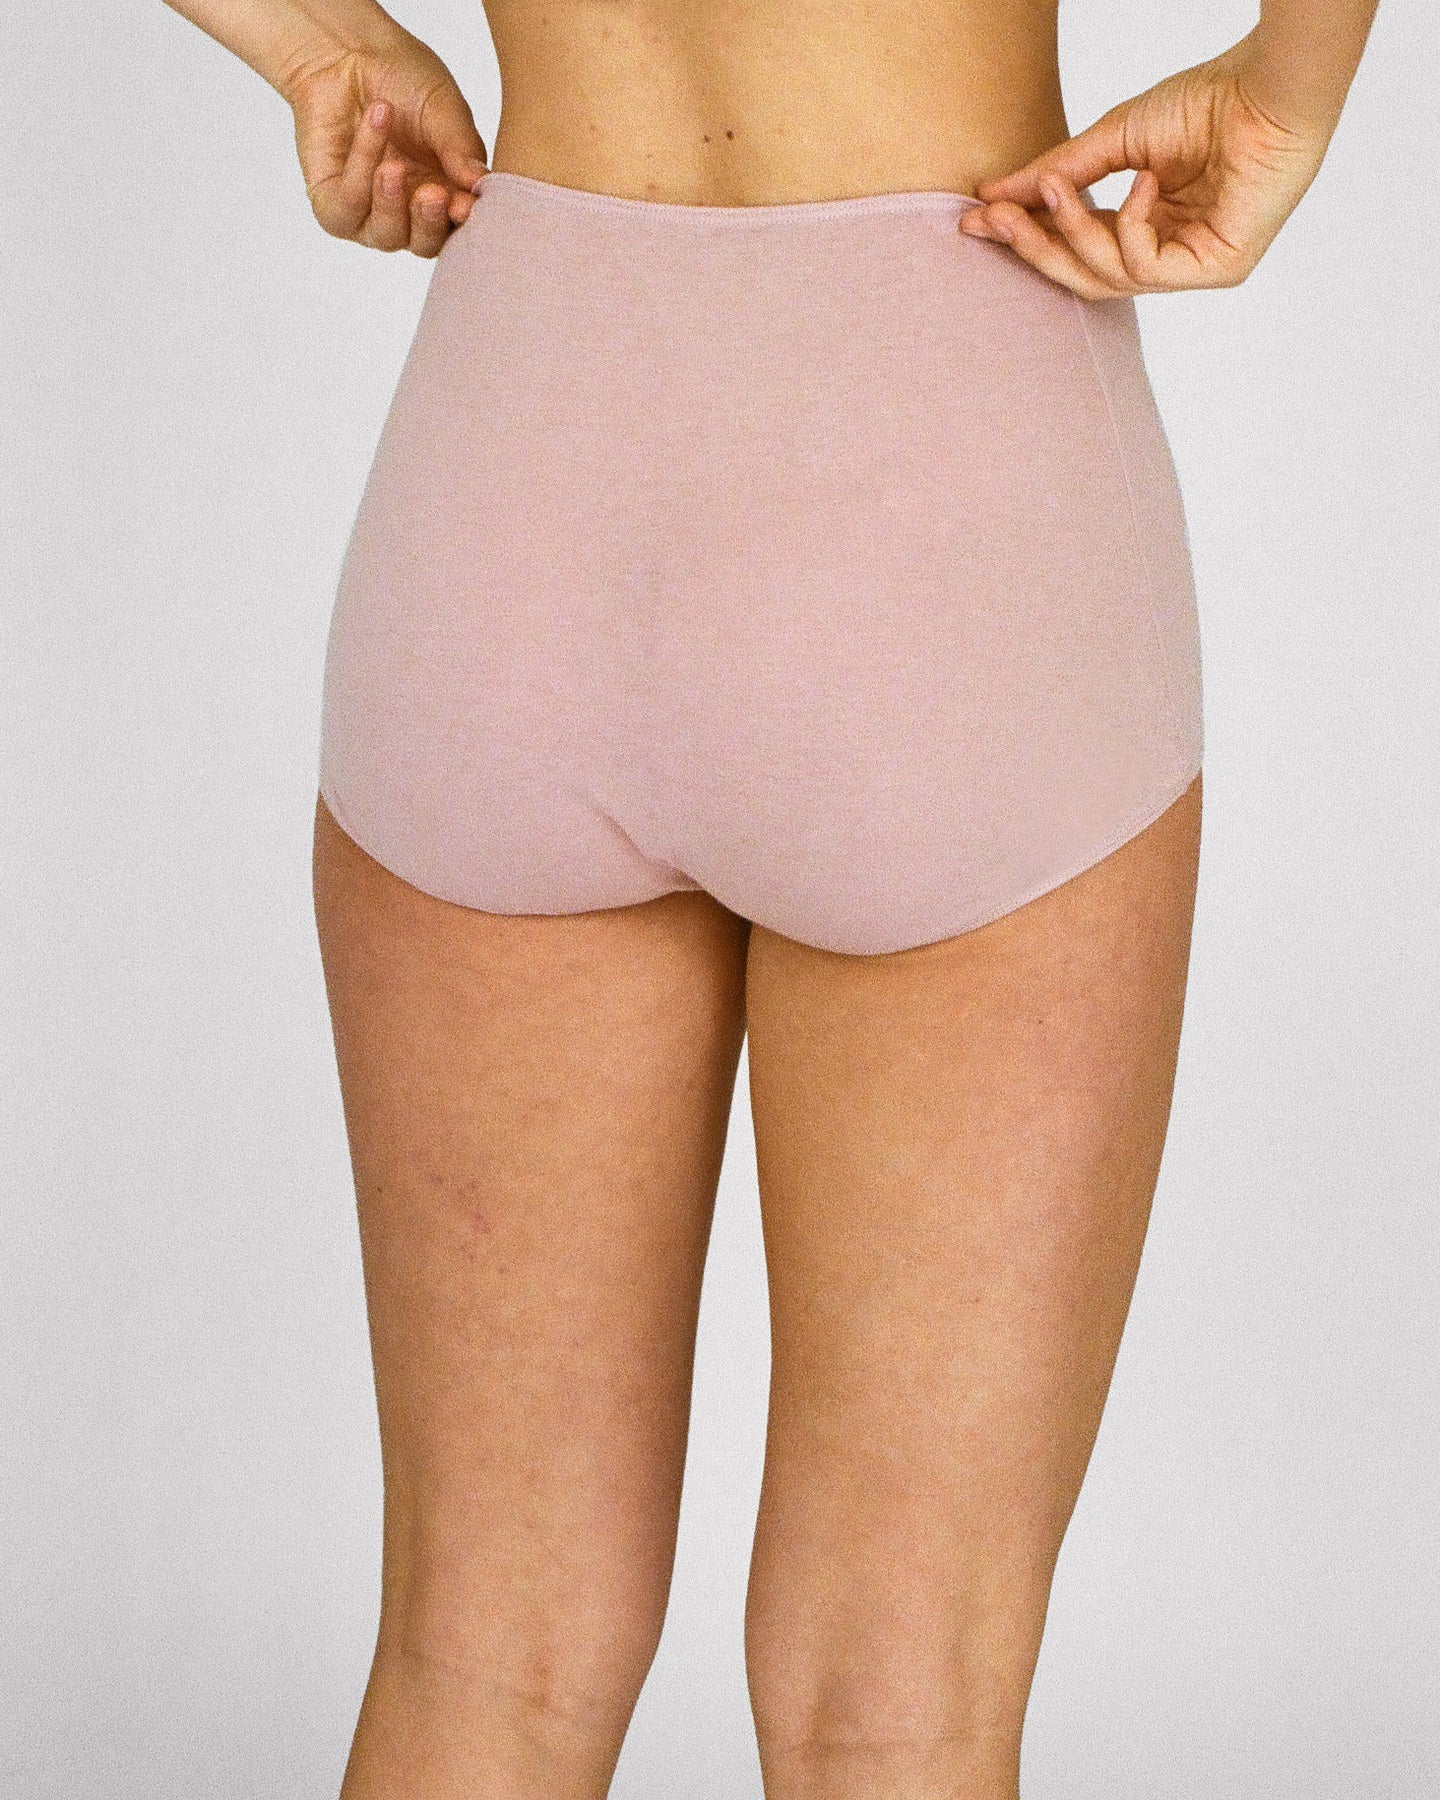 Plain Cotton Hosiery Comfortable Panty for sleeping at Rs 70/piece